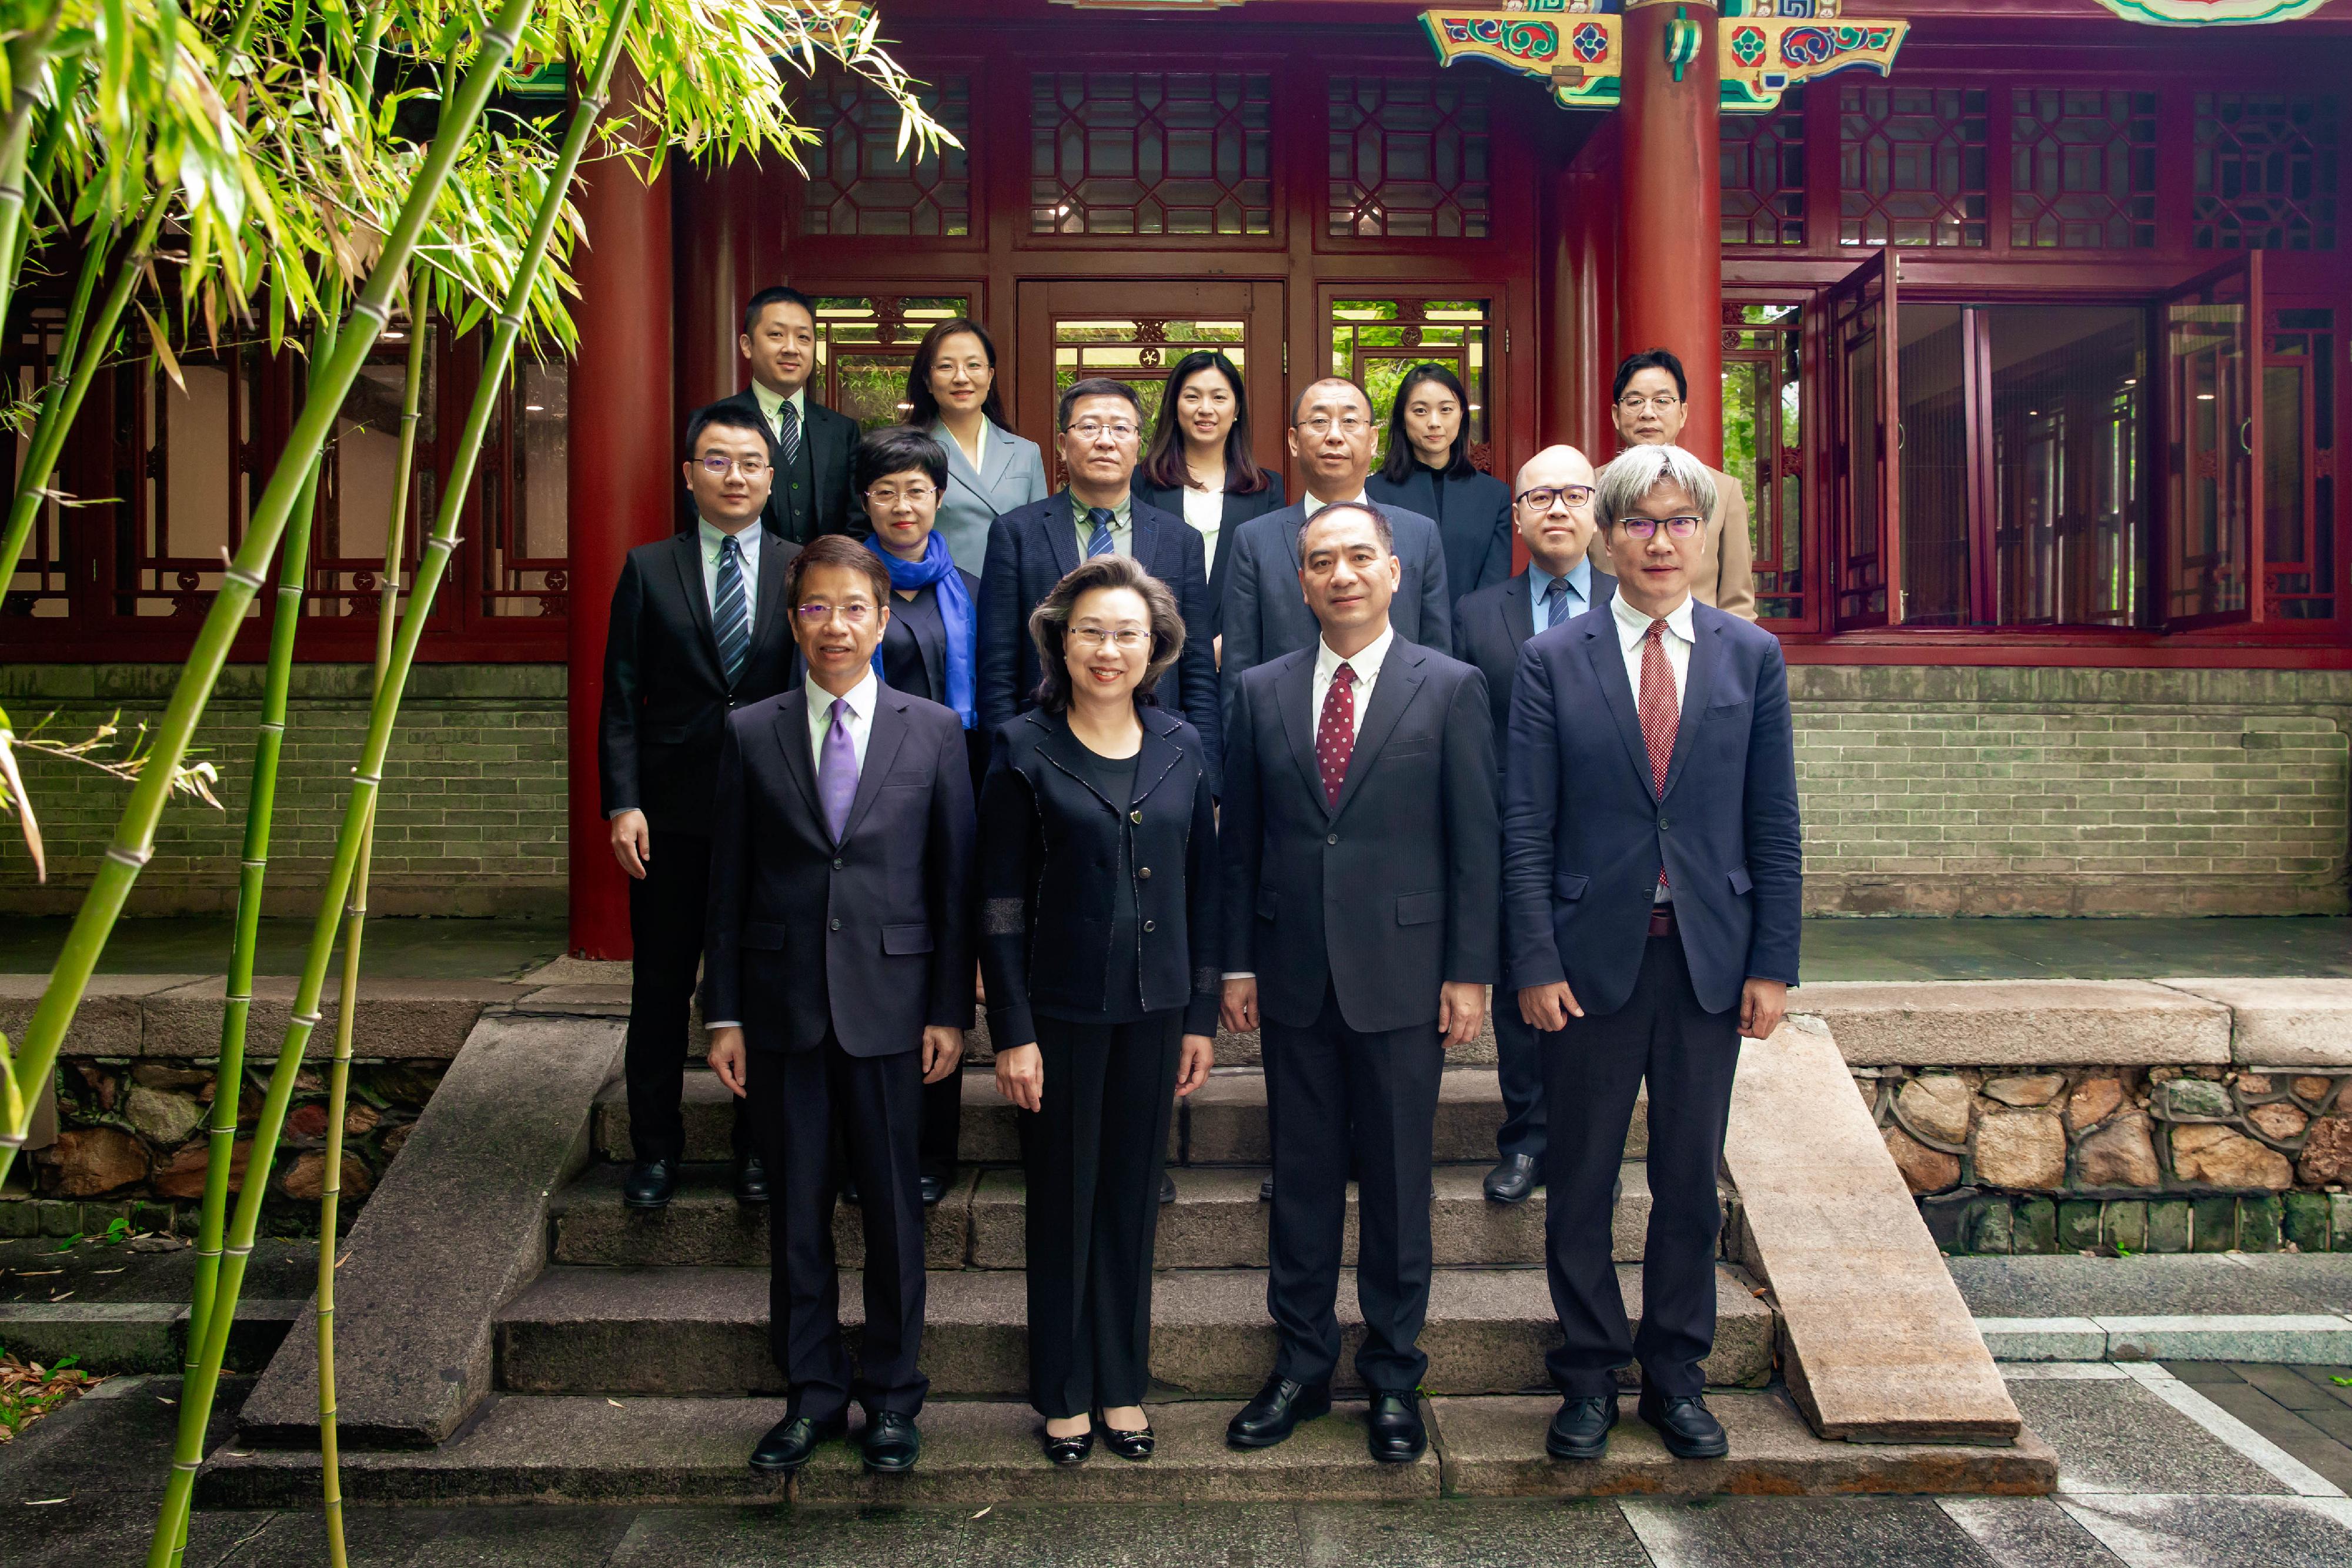 The Secretary for the Civil Service, Mrs Ingrid Yeung, called on Peking University today (April 28) on her last day of her visit to Beijing. Photo shows Mrs Yeung (front row, second left) and the Permanent Secretary for the Civil Service, Mr Clement Leung (front row, first left) with the President of Peking University, Mr Gong Qihuang (front row, second right), Vice President of Peking University Mr Wang Bo (front row, first right), other university leaders and representatives from the Civil Service Bureau.
